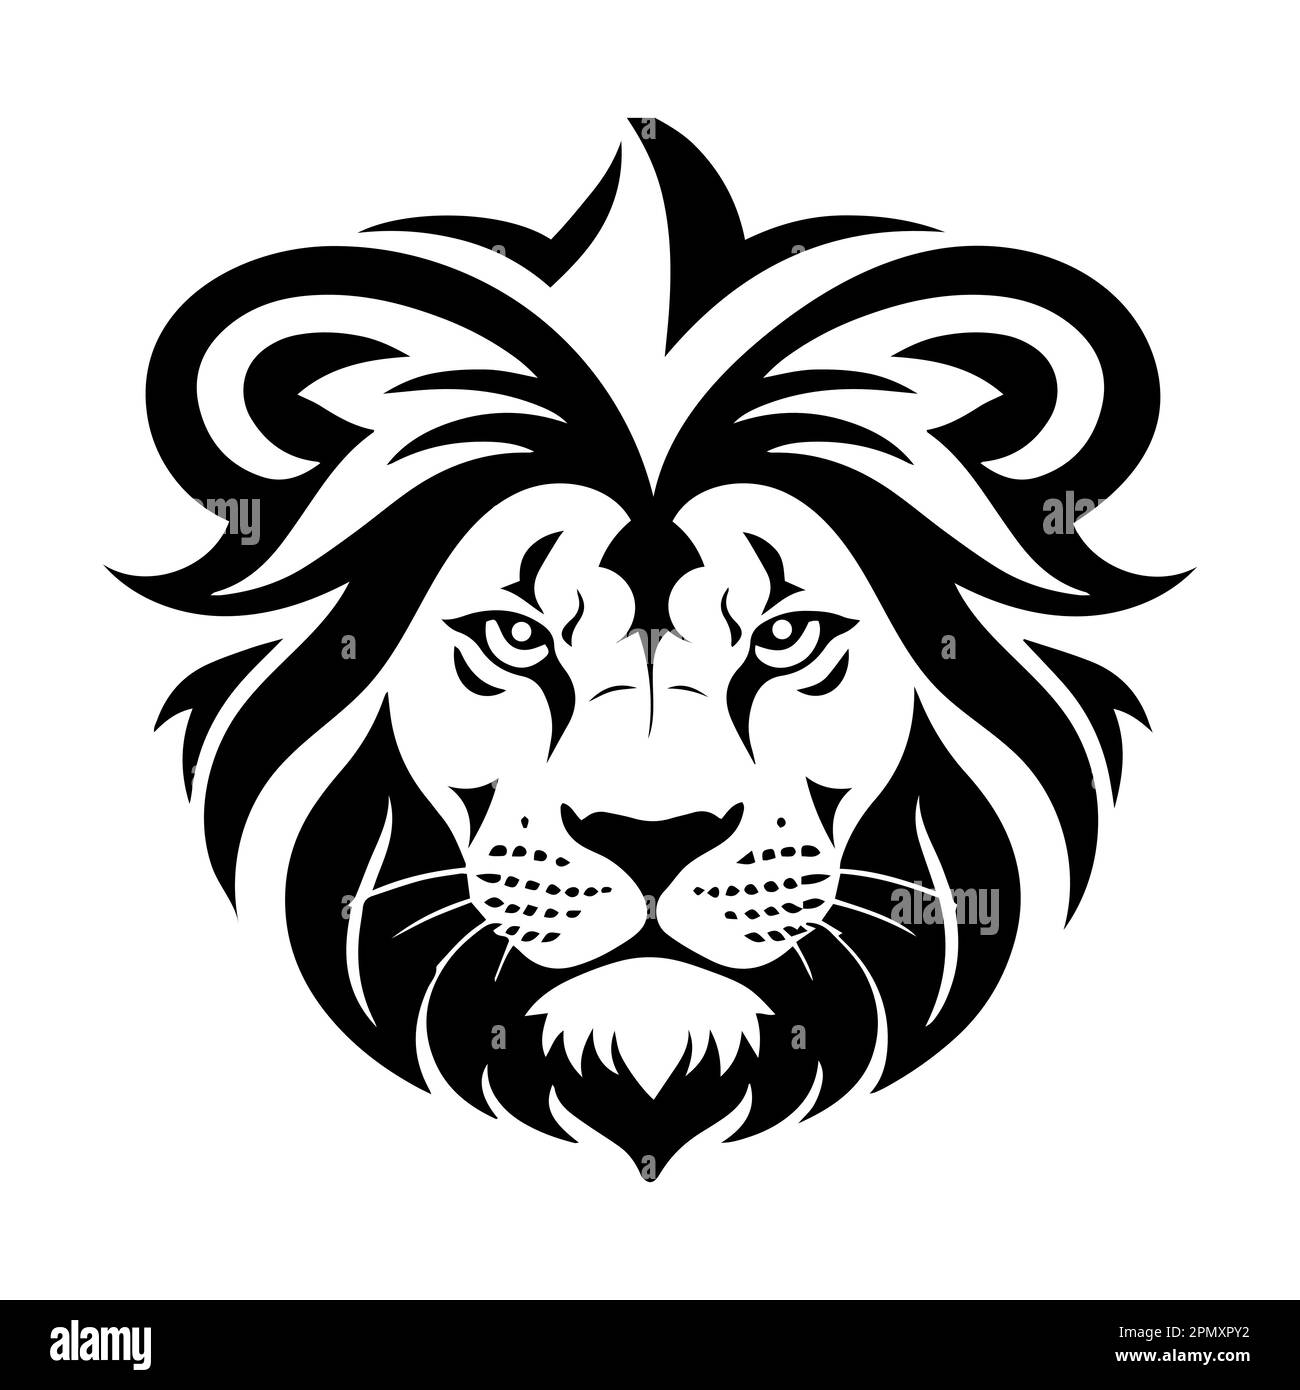 Lion head tattoo. Black and white vector illustration isolated on white background. Stock Vector